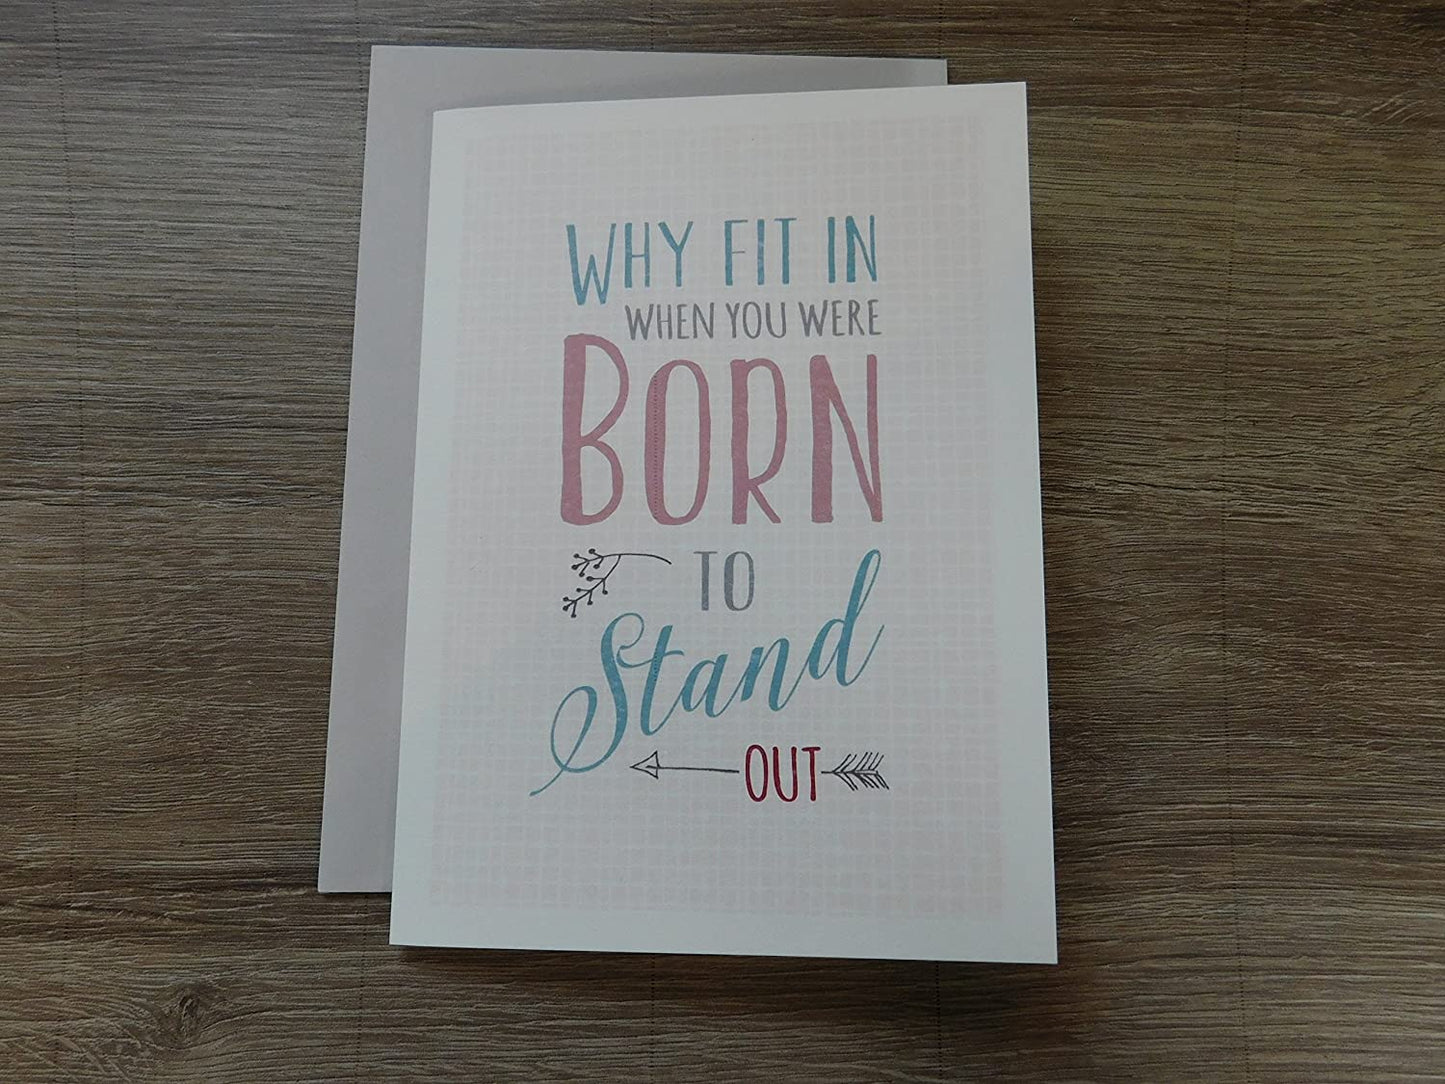 East of India - Just my type greeting card - Why fit in when you were born to stand out